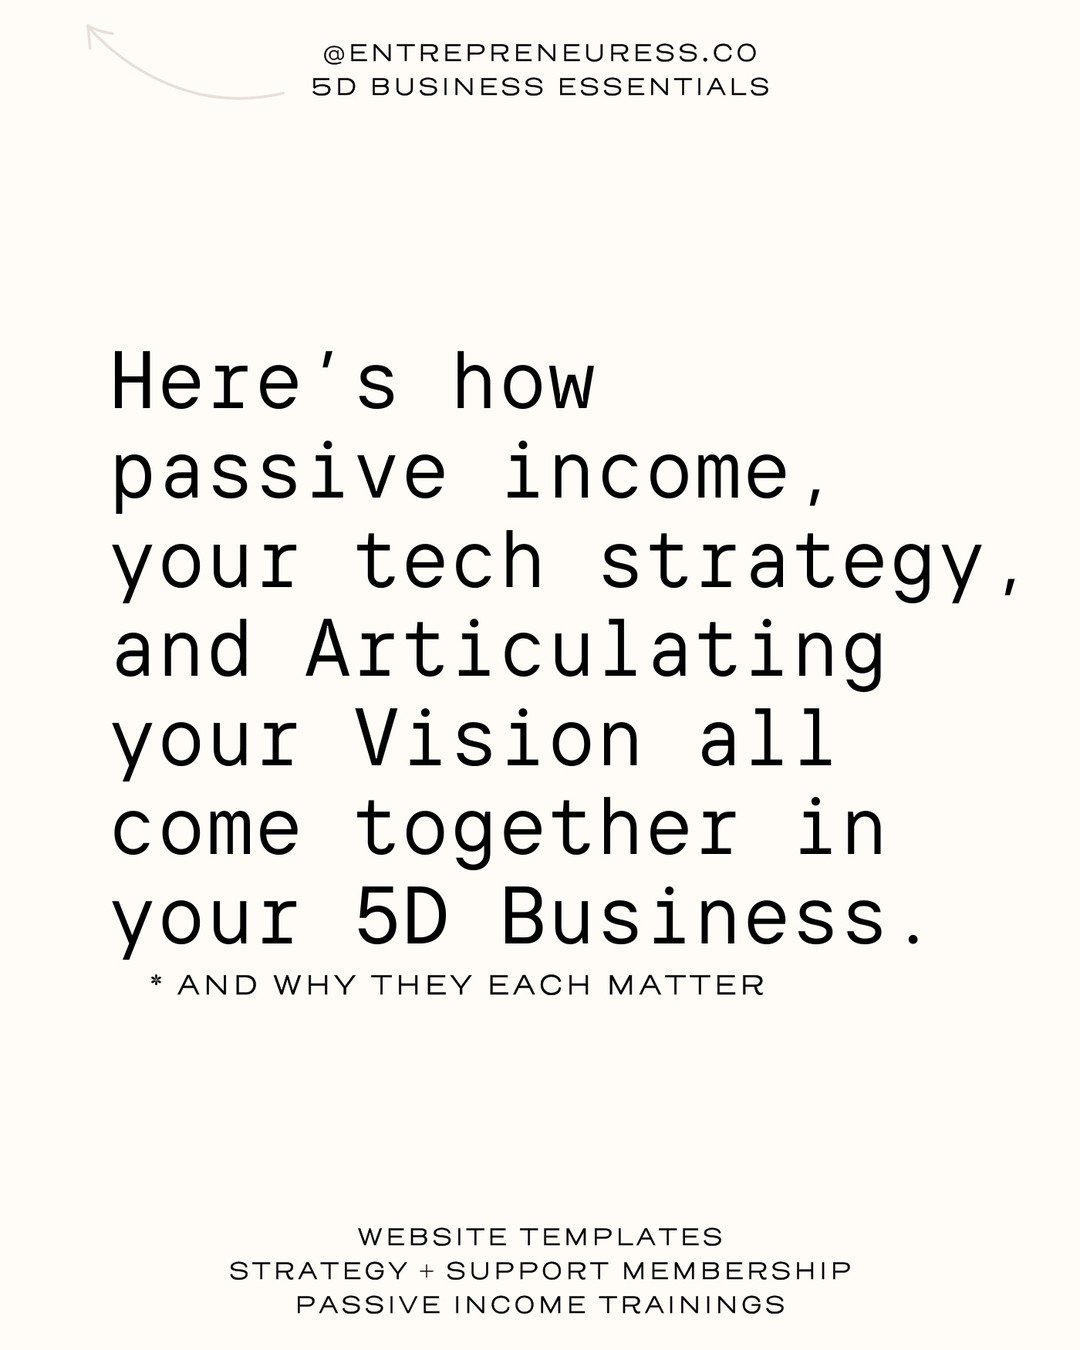 5D Business in a Nutshell ⤵

Build 🪲
Then be 🦋

#5Dbusiness